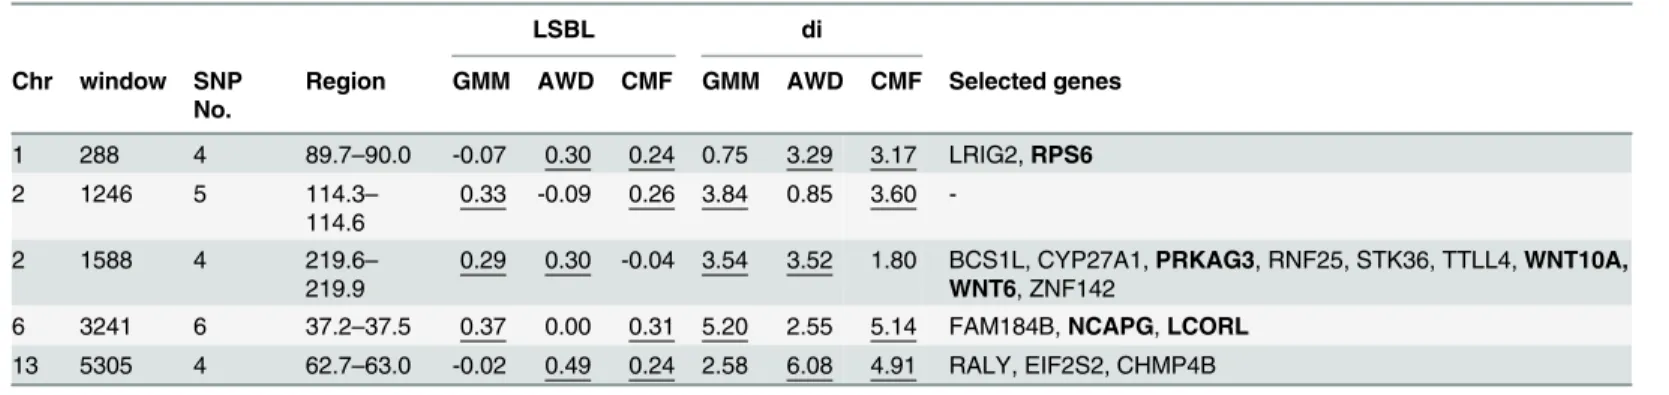 Table 4. The genes in overlapping selection windows.